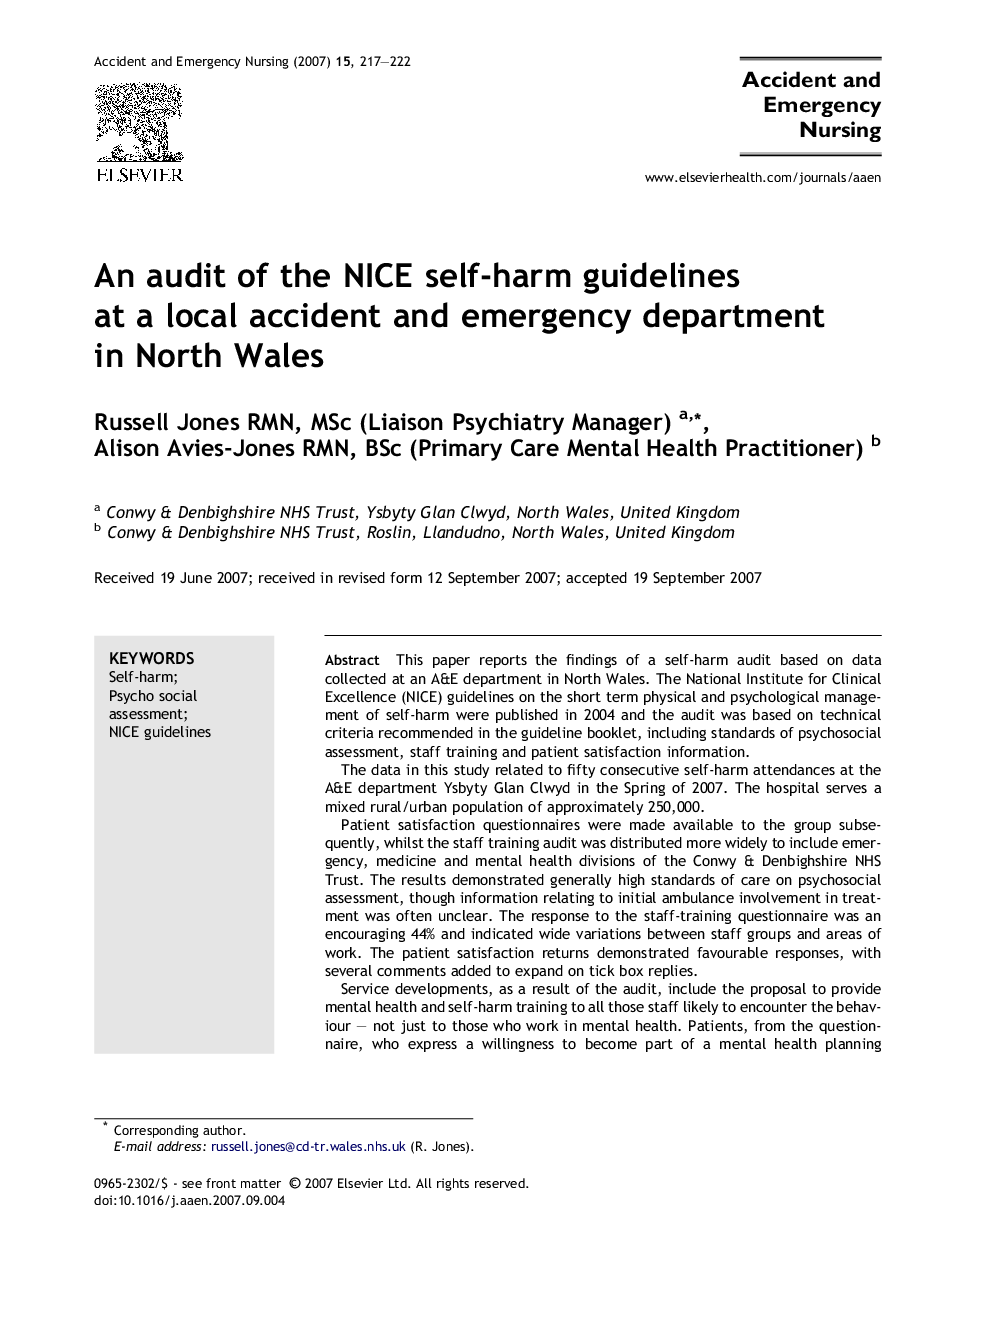 An audit of the NICE self-harm guidelines at a local accident and emergency department in North Wales